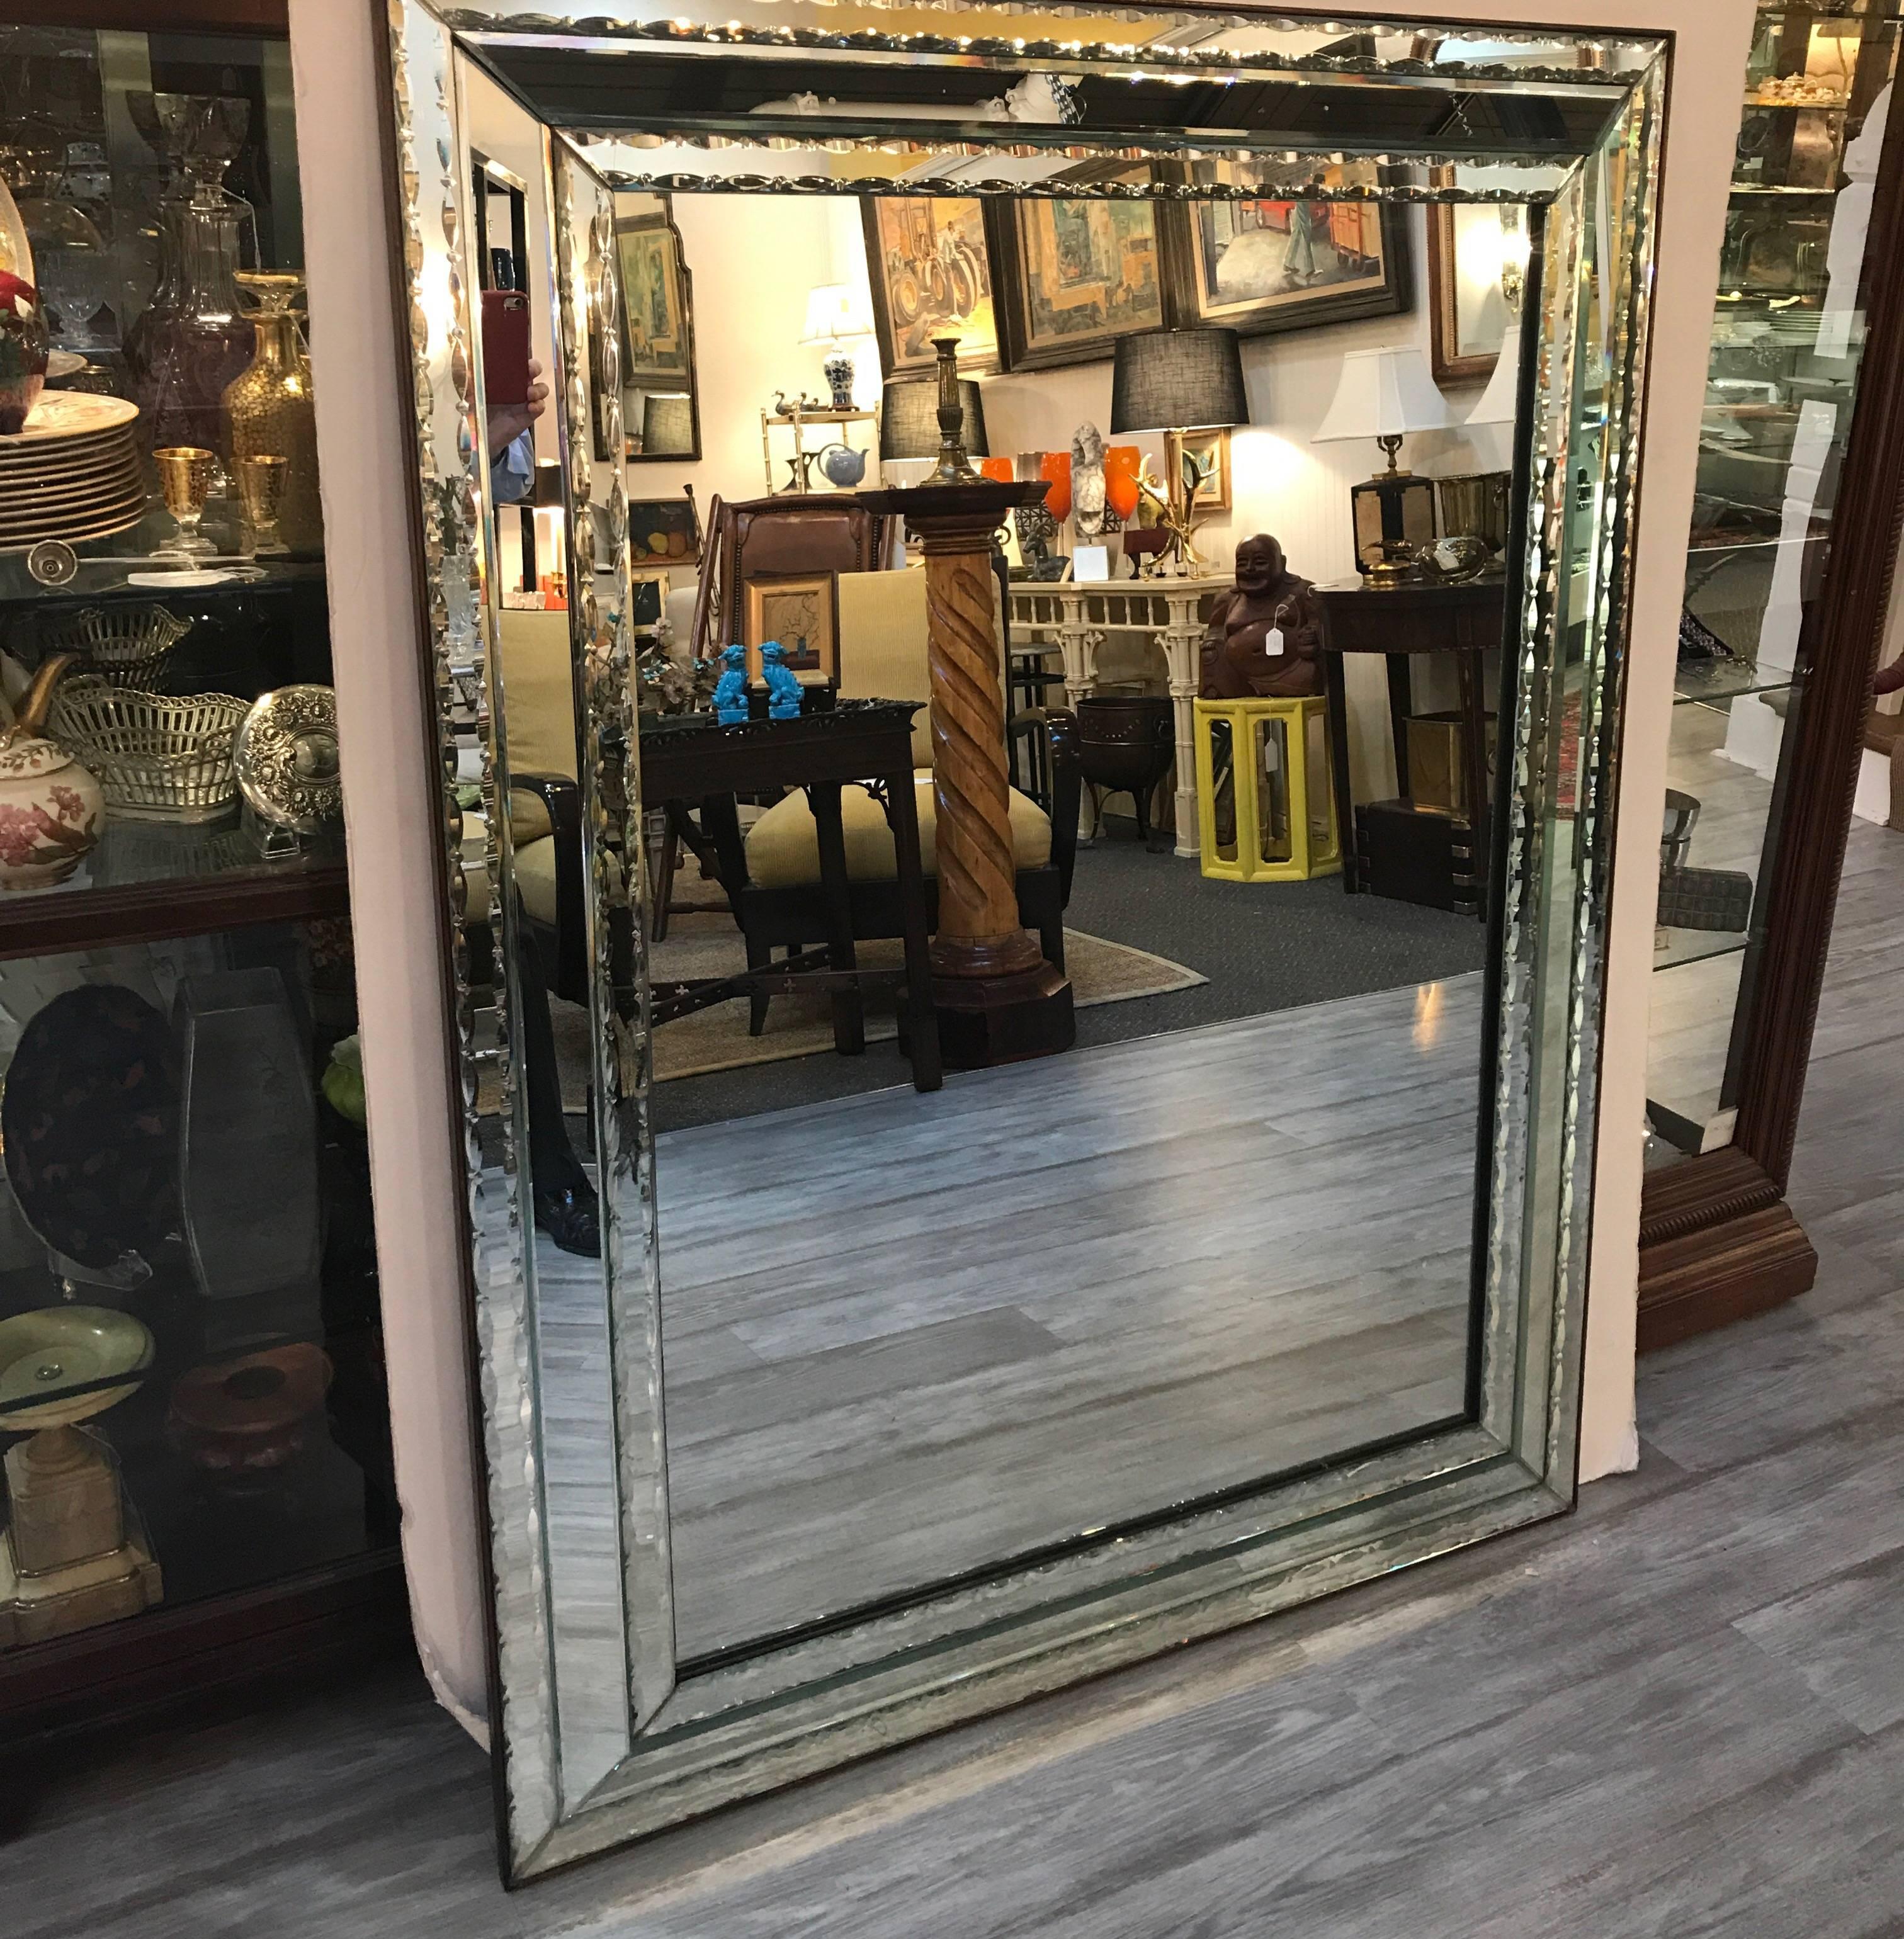 A large and elegant antique Venetian mirror made in Italy in the 1920s. The mirrored frame with cut scallop edges with a mahogany trim and back. This mirror is unique as it is more tailored and has an Art Deco influence.